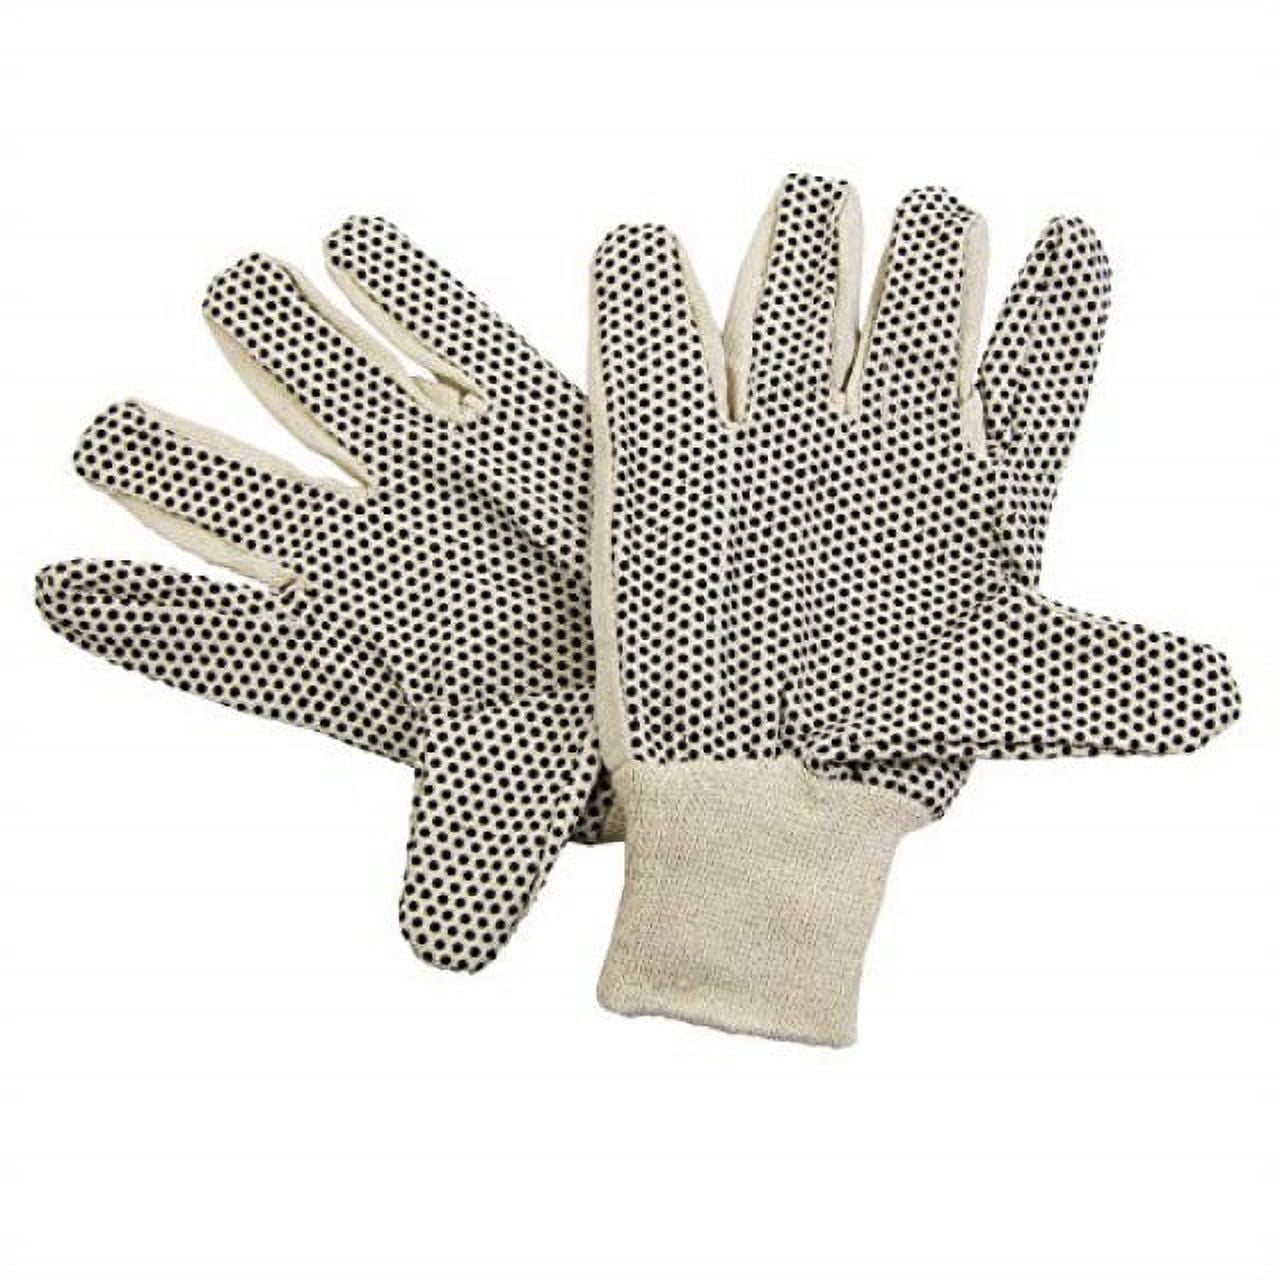 12 Pairs Large Cotton Canvas Knit Protection Work Gloves with